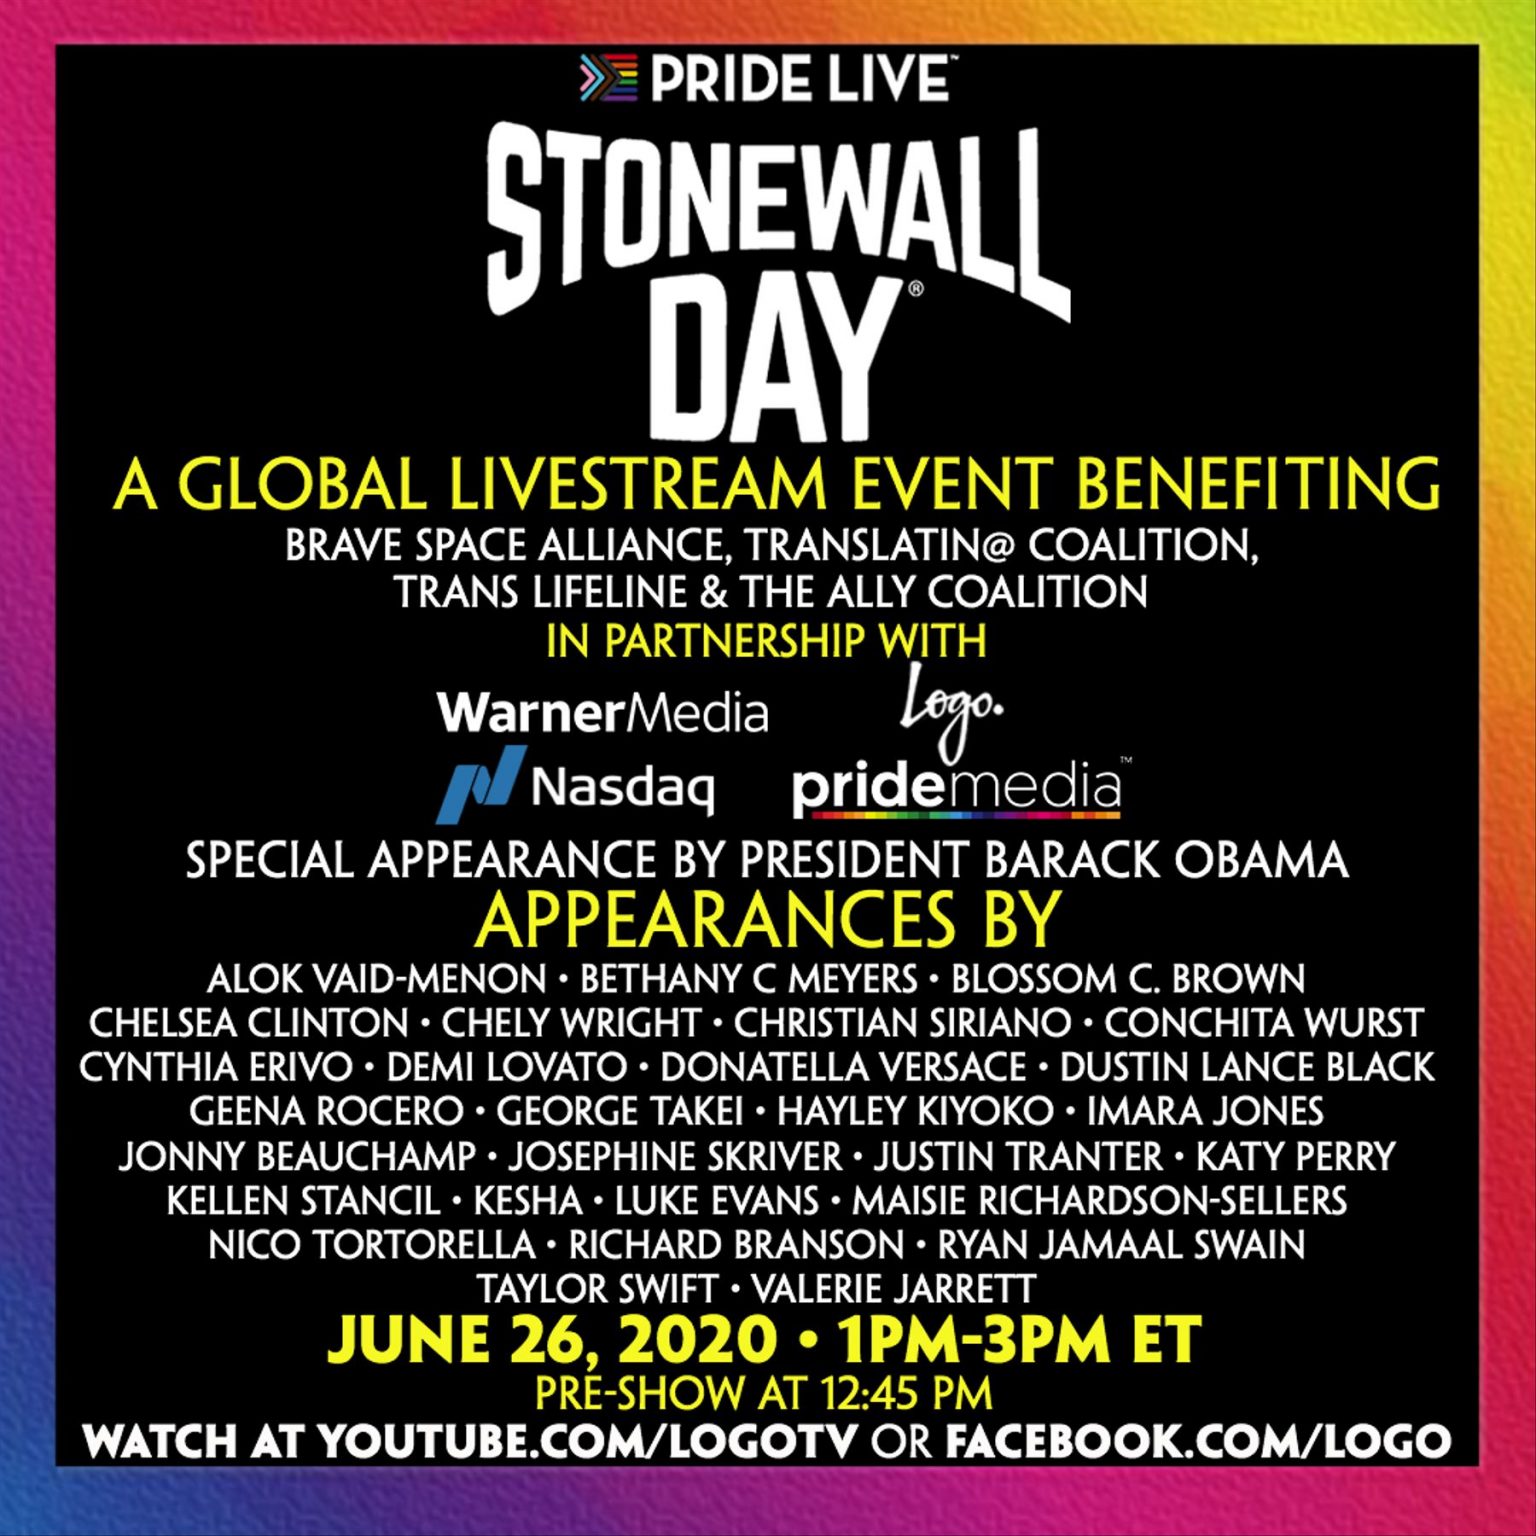 Pride Live and Pride Media’s Third Annual Stonewall Day idobi Network